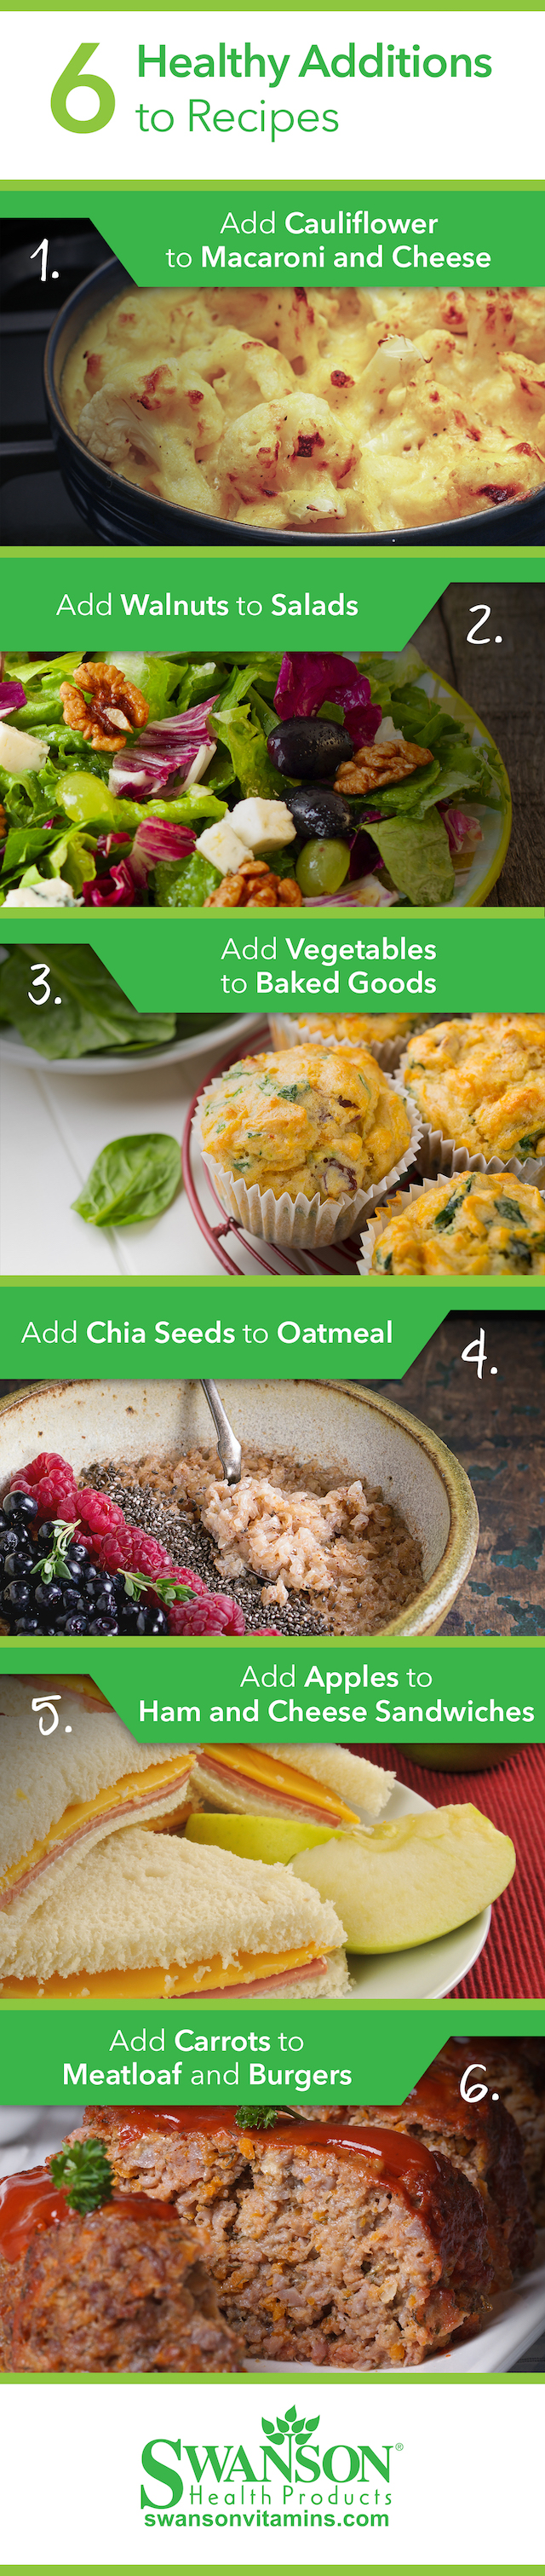 test-Add 1 Extra Ingredient to Make These Recipes Healthier